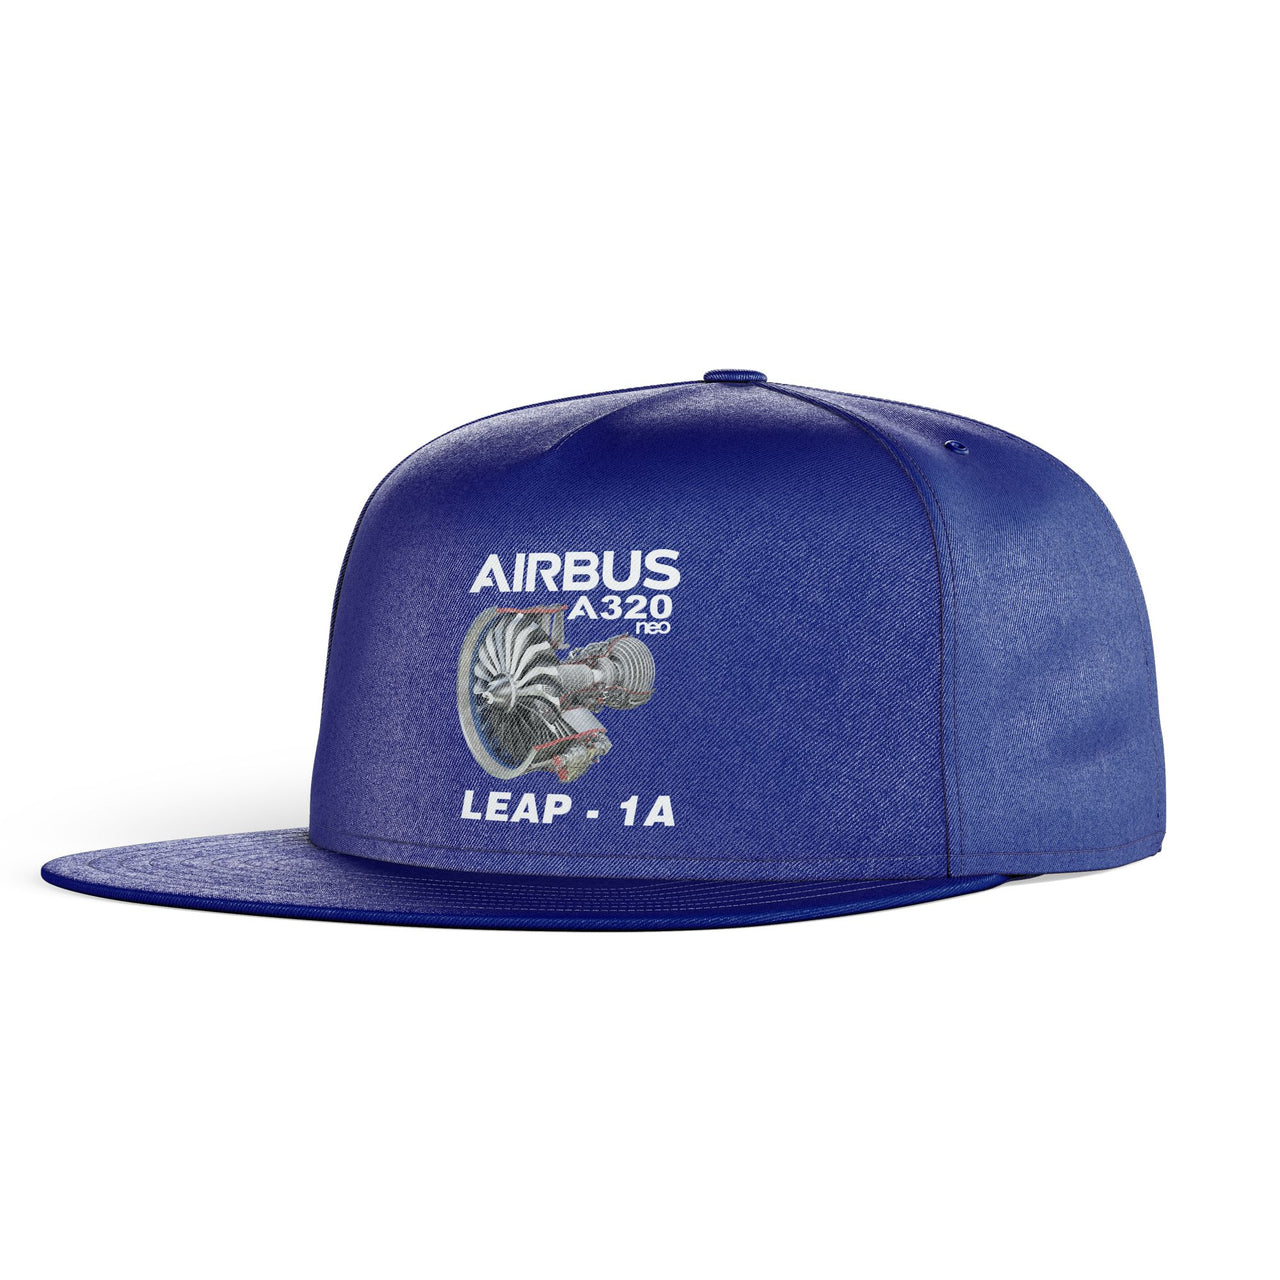 Airbus A320neo & Leap 1A Designed Snapback Caps & Hats